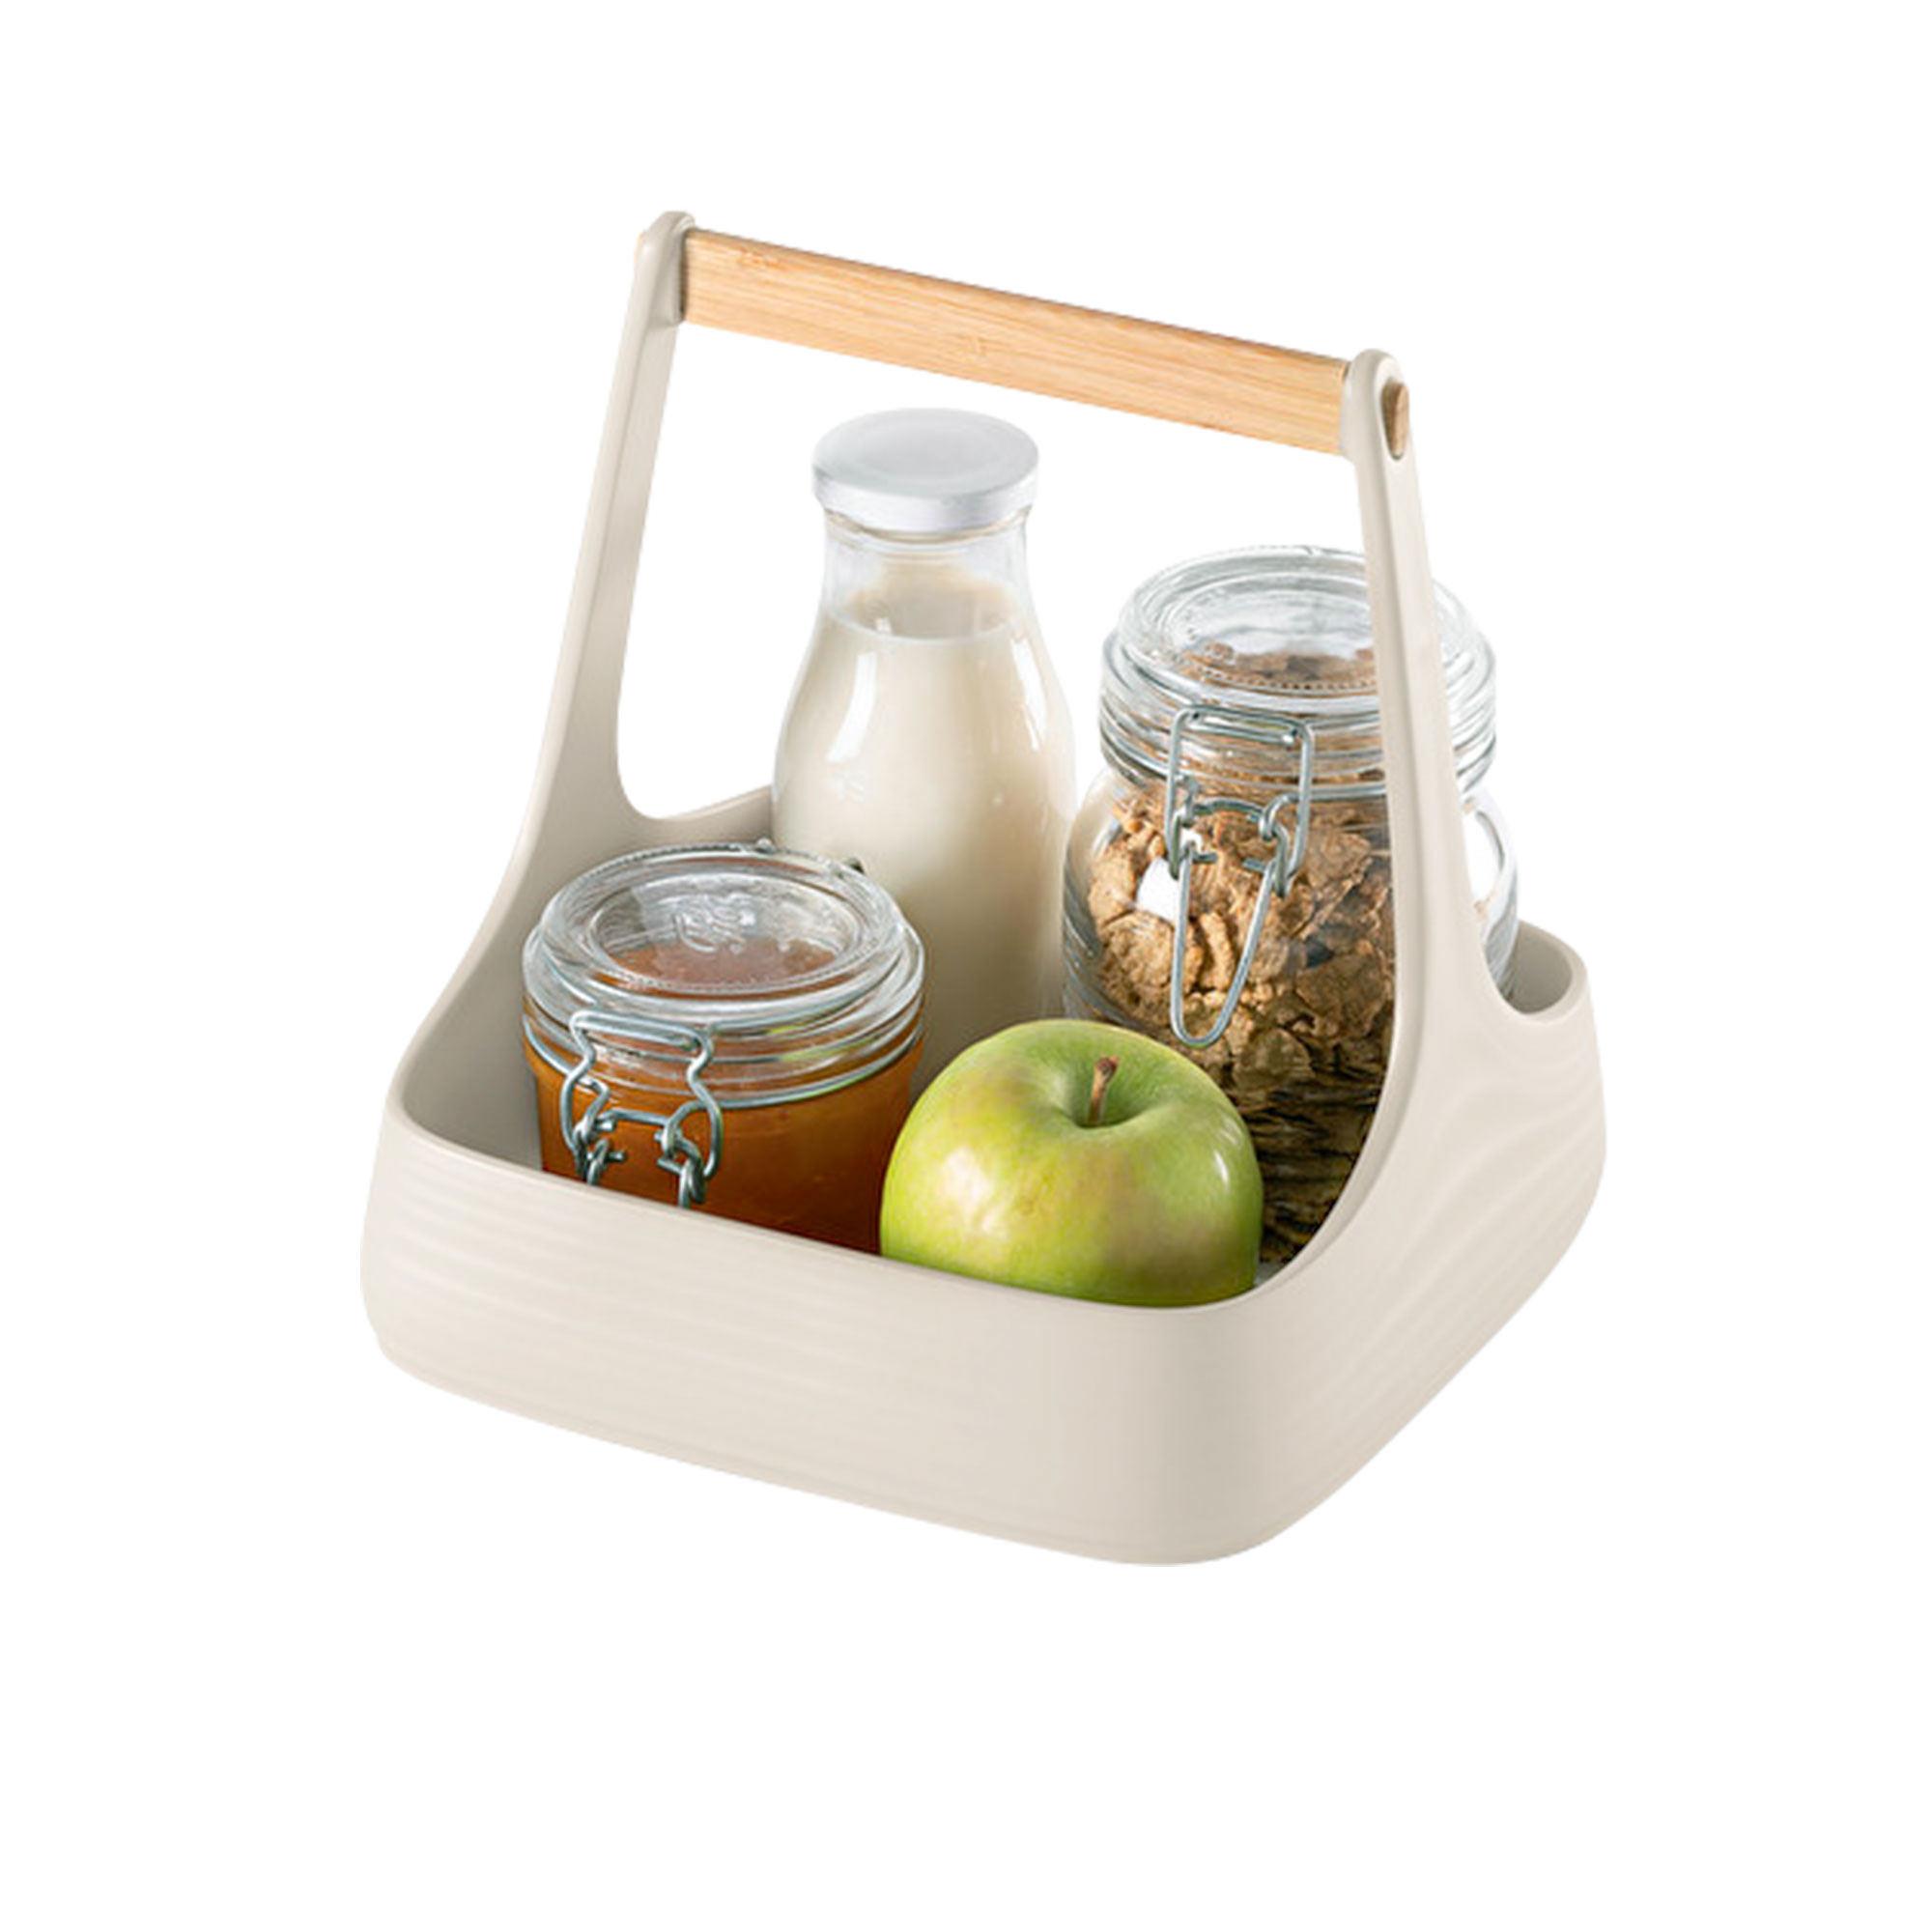 Guzzini Earth All Together Table Caddy White Image 3